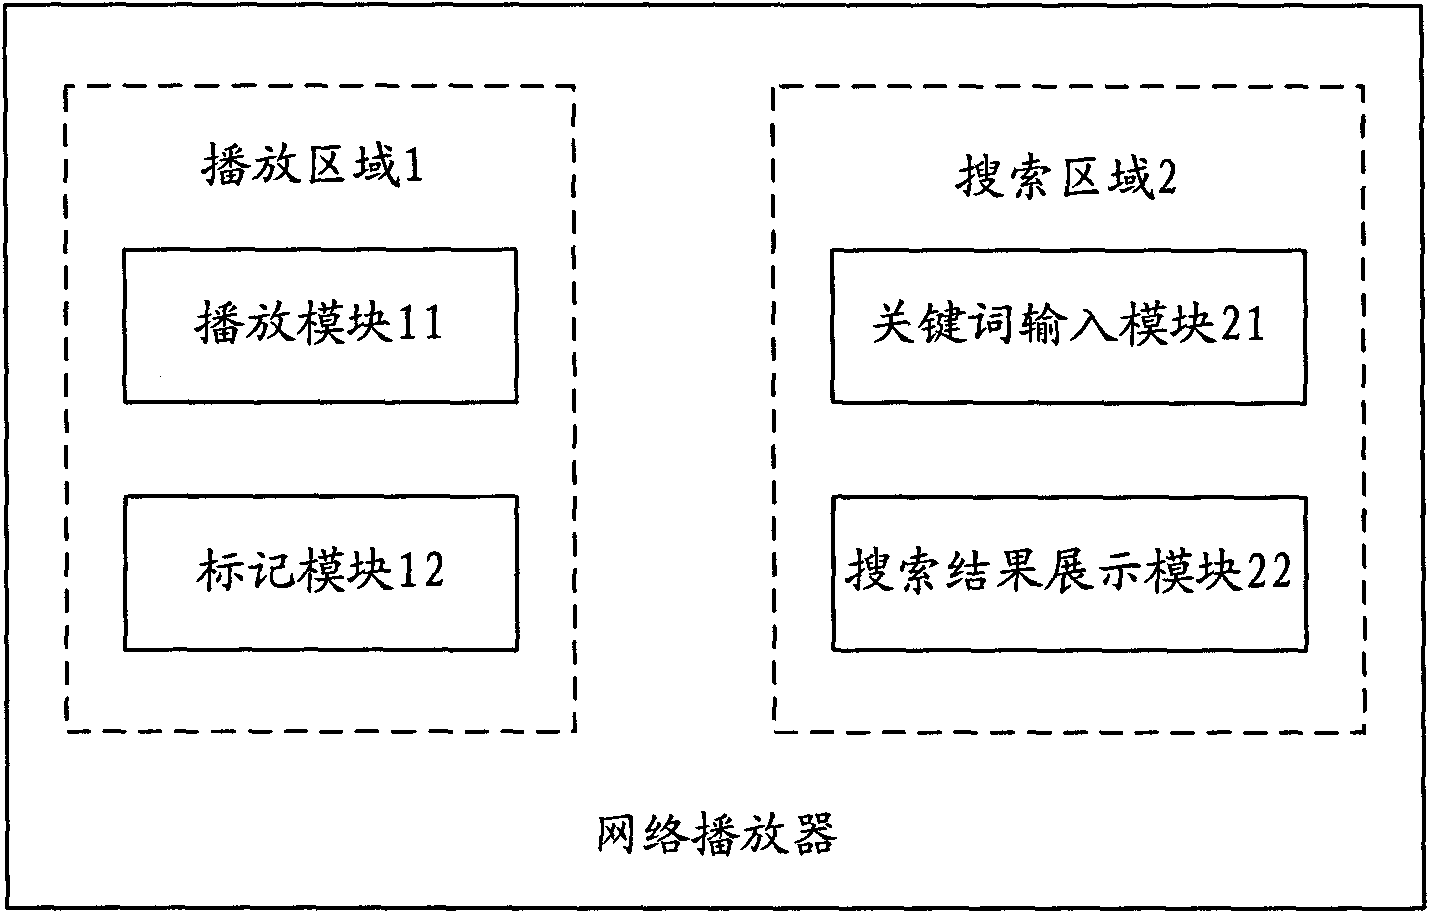 Network player and server for providing search service